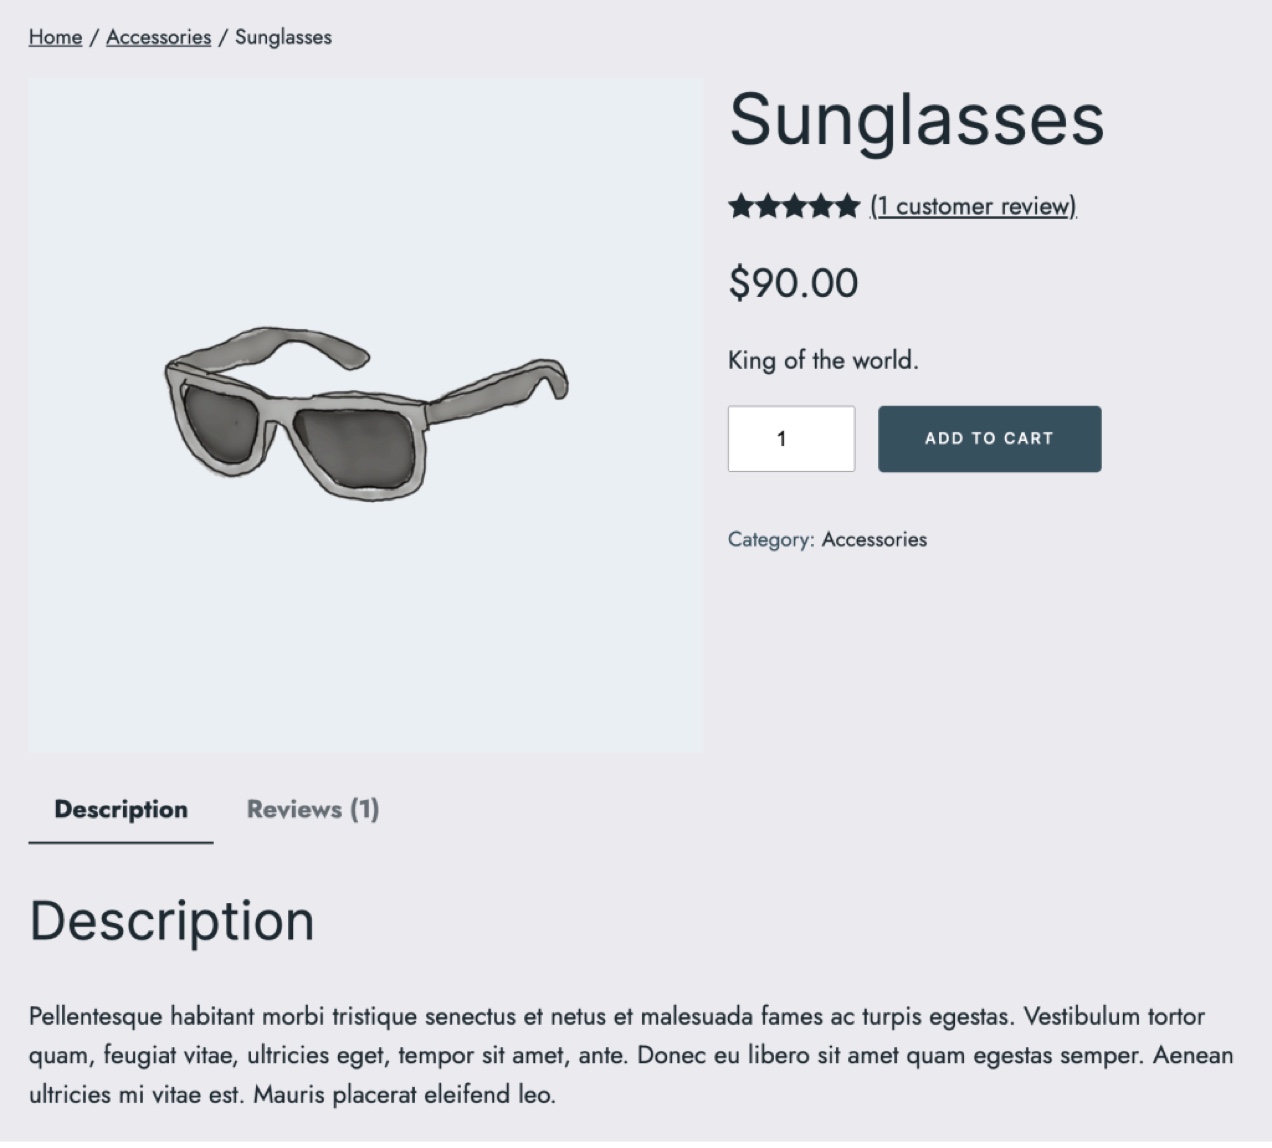 product details box for a pair of sunglasses